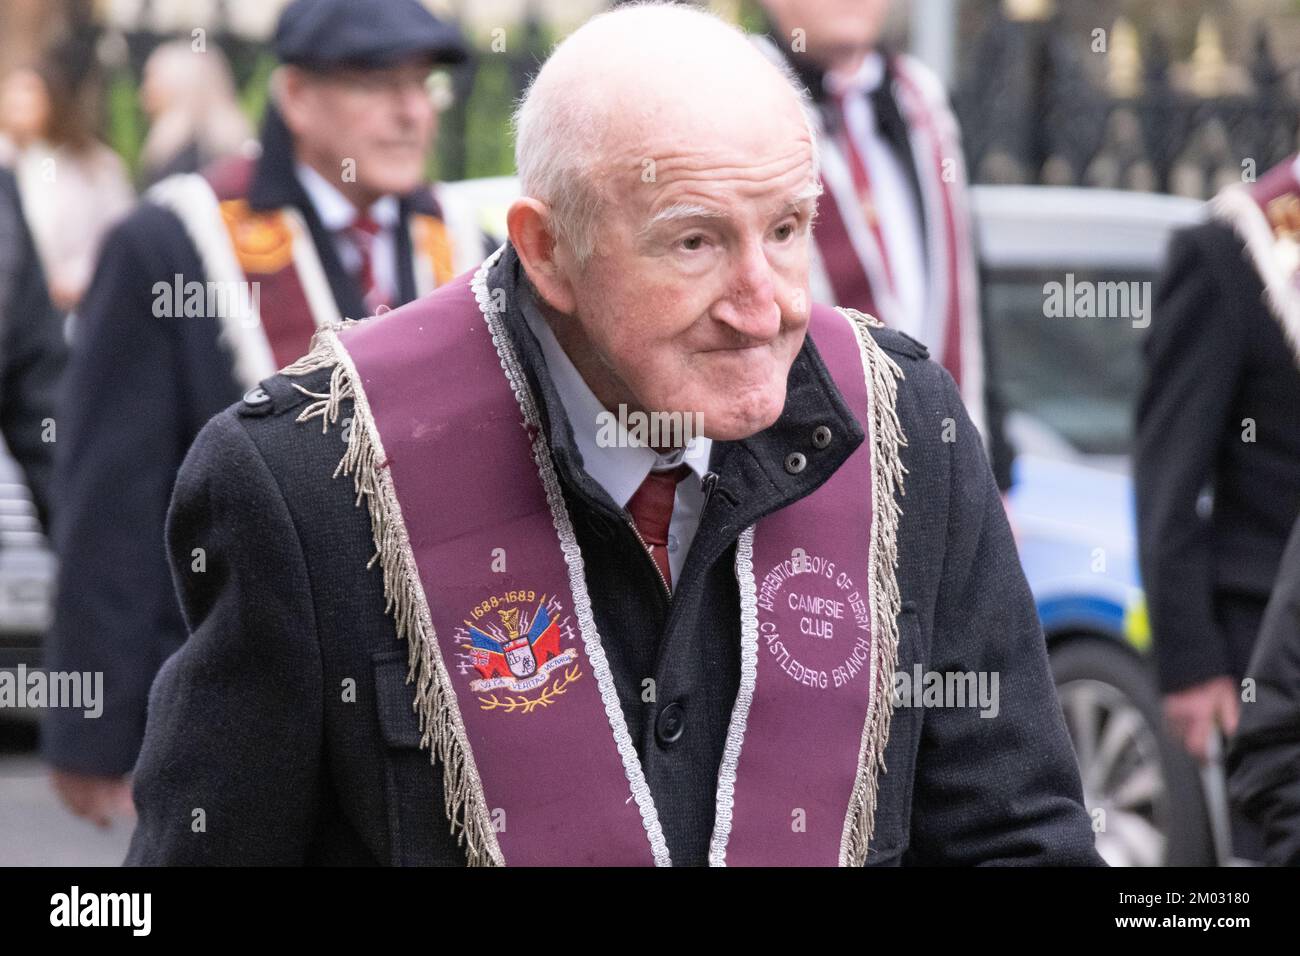 Londonderry, United Kingdom. 3 Dec, 2022. Member of Castlederg branch of the Apprentice Boys of Derry at Shutting of the Gates 2022. Credit: Steve Nimmons/Alamy Live News Stock Photo